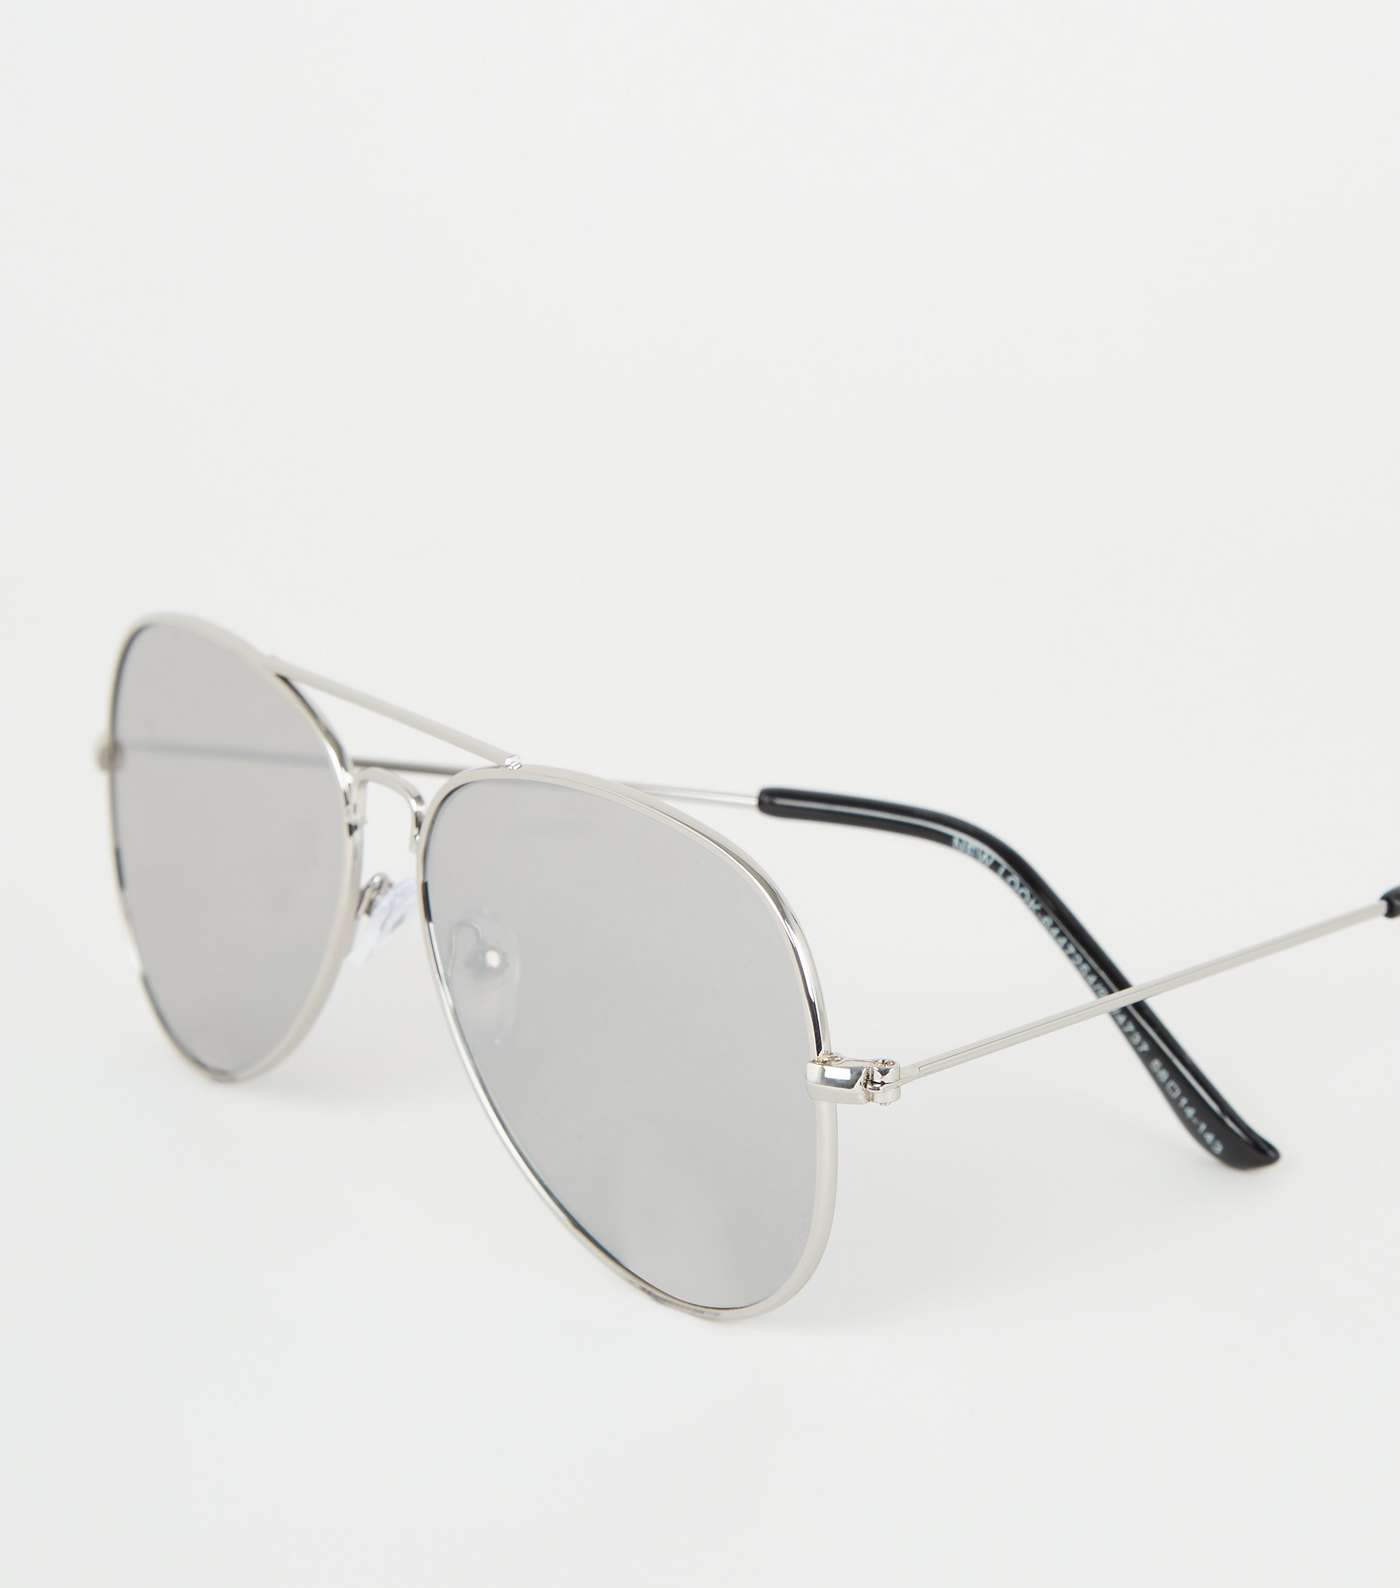 Silver Thin Frame Sunglasses Image 4